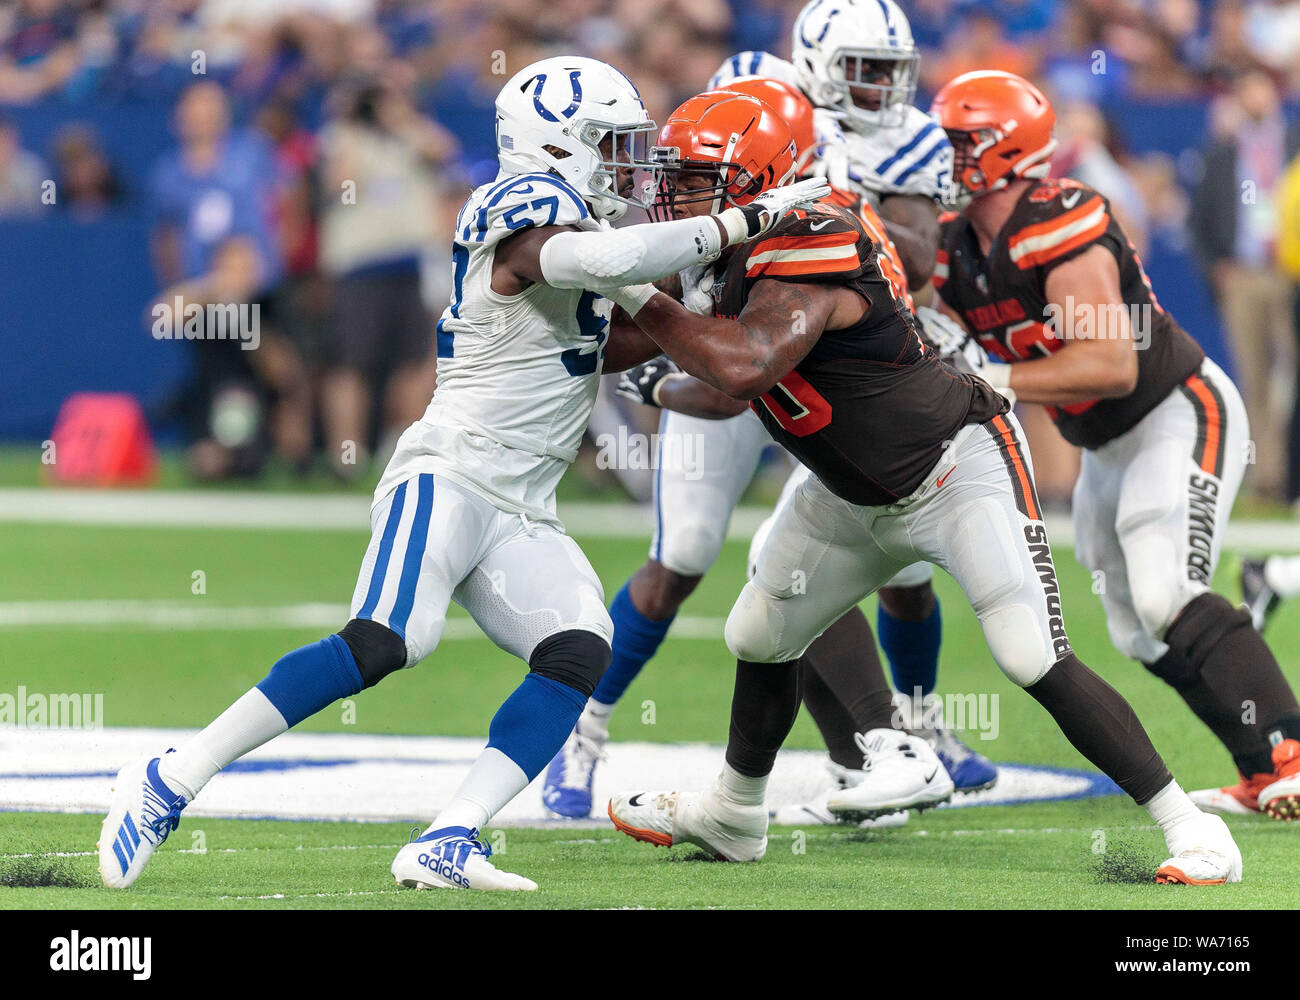 Indianapolis, USA. 17 August 2019.  Indianapolis Colts defensive lineman Kemoko Turay (57) and Cleveland Browns offensive lineman Kendall Lamm (70) battle at the line of scrimmage during NFL football preseason game action between the Cleveland Browns and the Indianapolis Colts at Lucas Oil Stadium in Indianapolis, Indiana. Cleveland defeated Indianapolis 21-18. John Mersits/CSM. Credit: Cal Sport Media/Alamy Live News Stock Photo